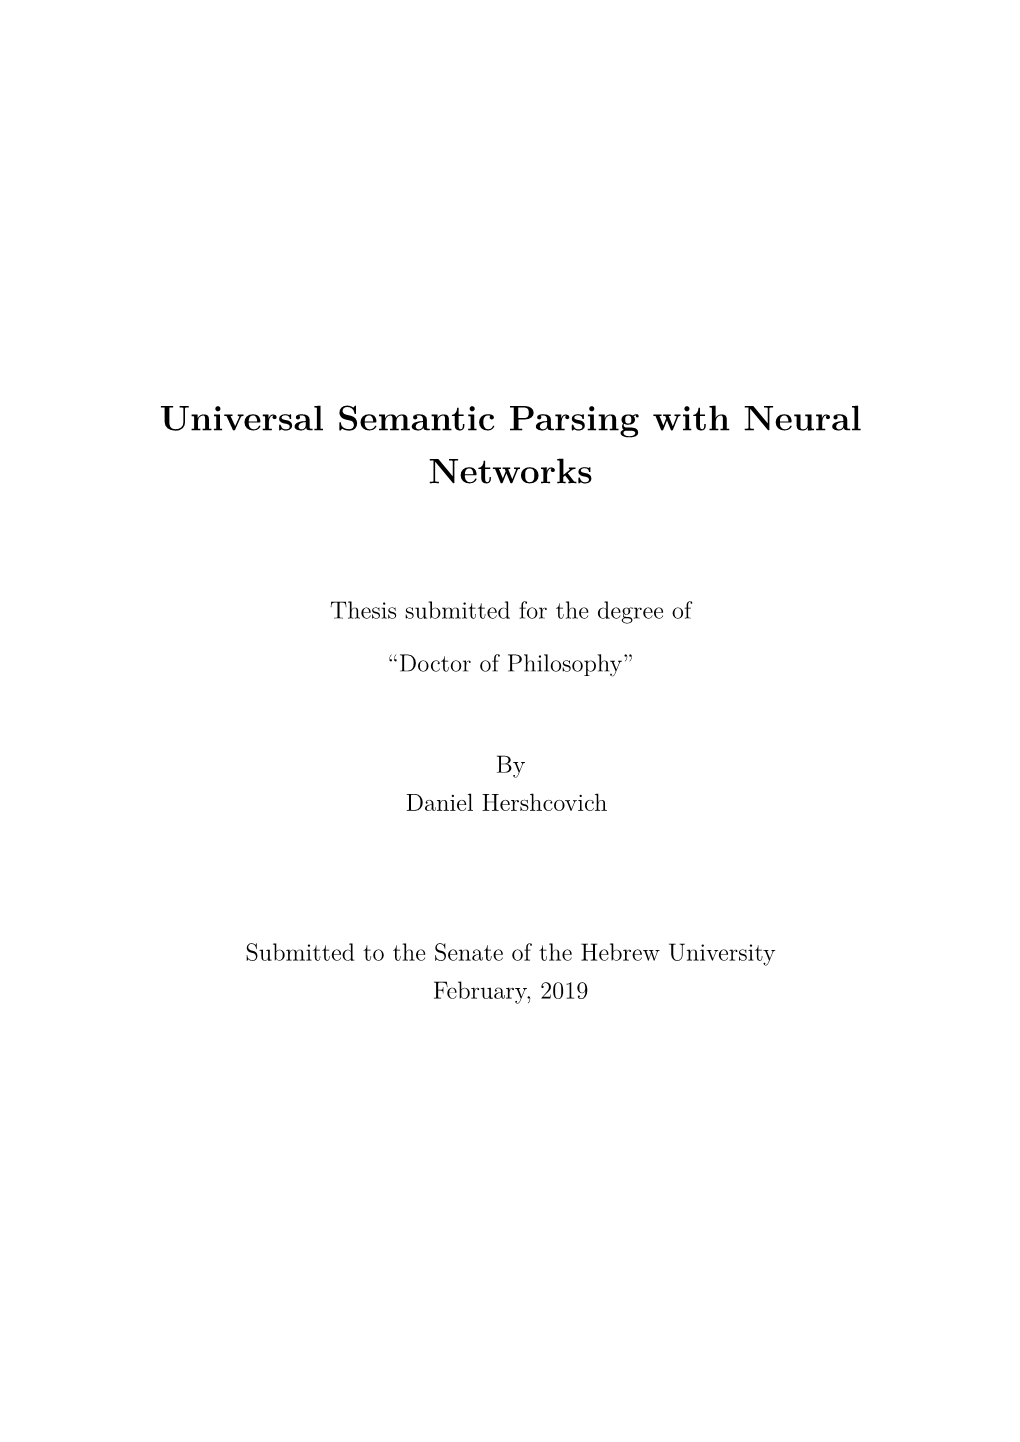 Universal Semantic Parsing with Neural Networks